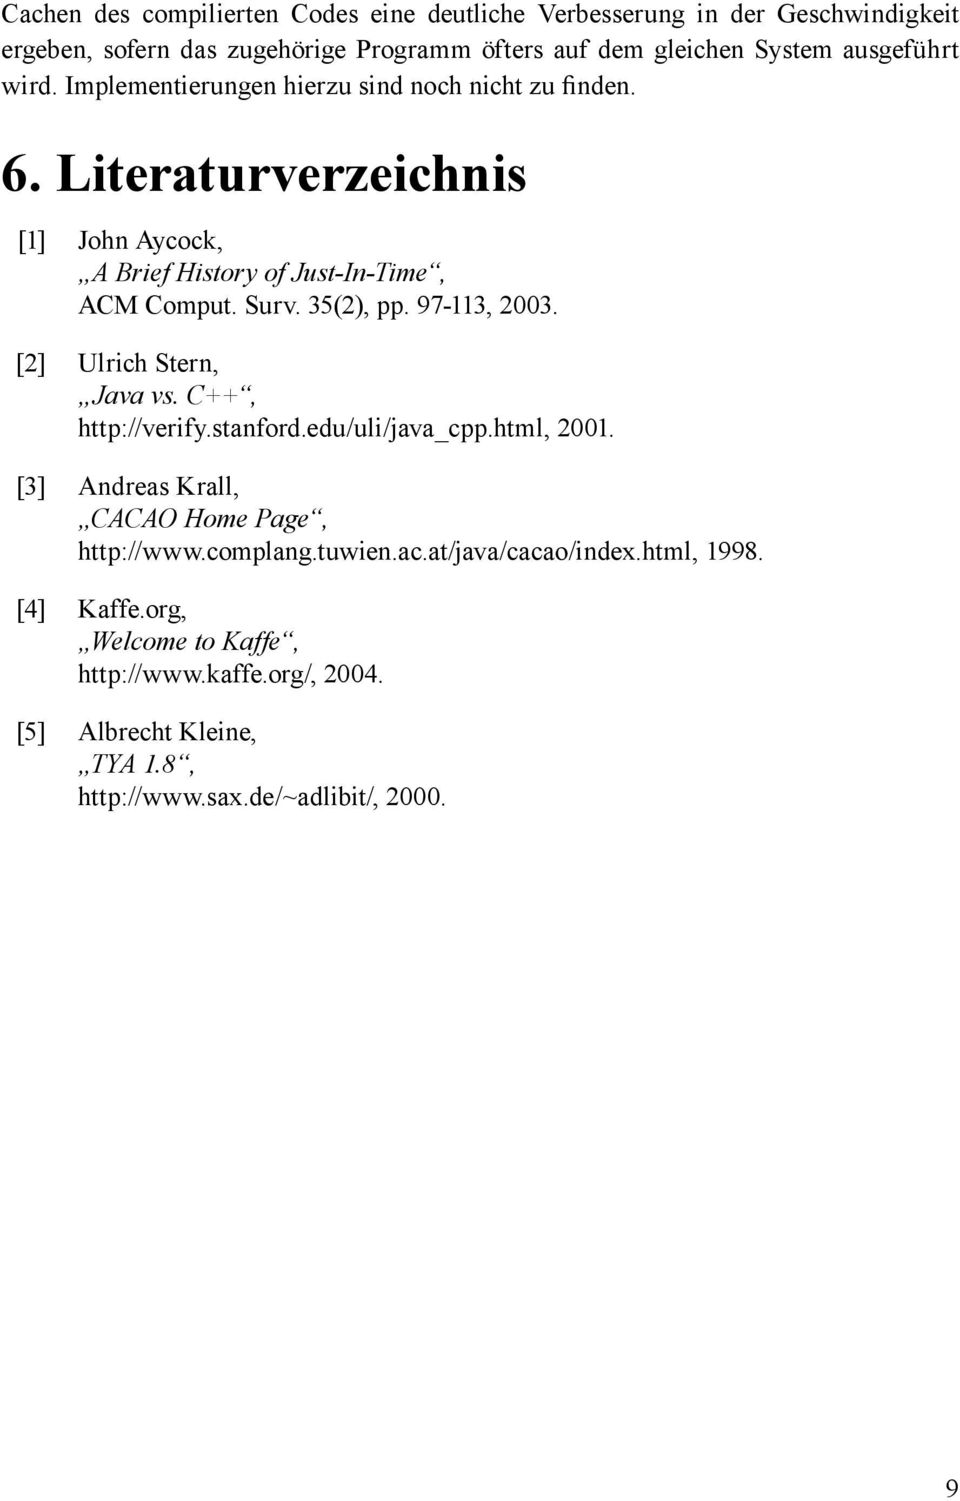 35(2), pp. 97-113, 2003. [2] Ulrich Stern, Java vs. C++, http://verify.stanford.edu/uli/java_cpp.html, 2001. [3] Andreas Krall, CACAO Home Page, http://www.